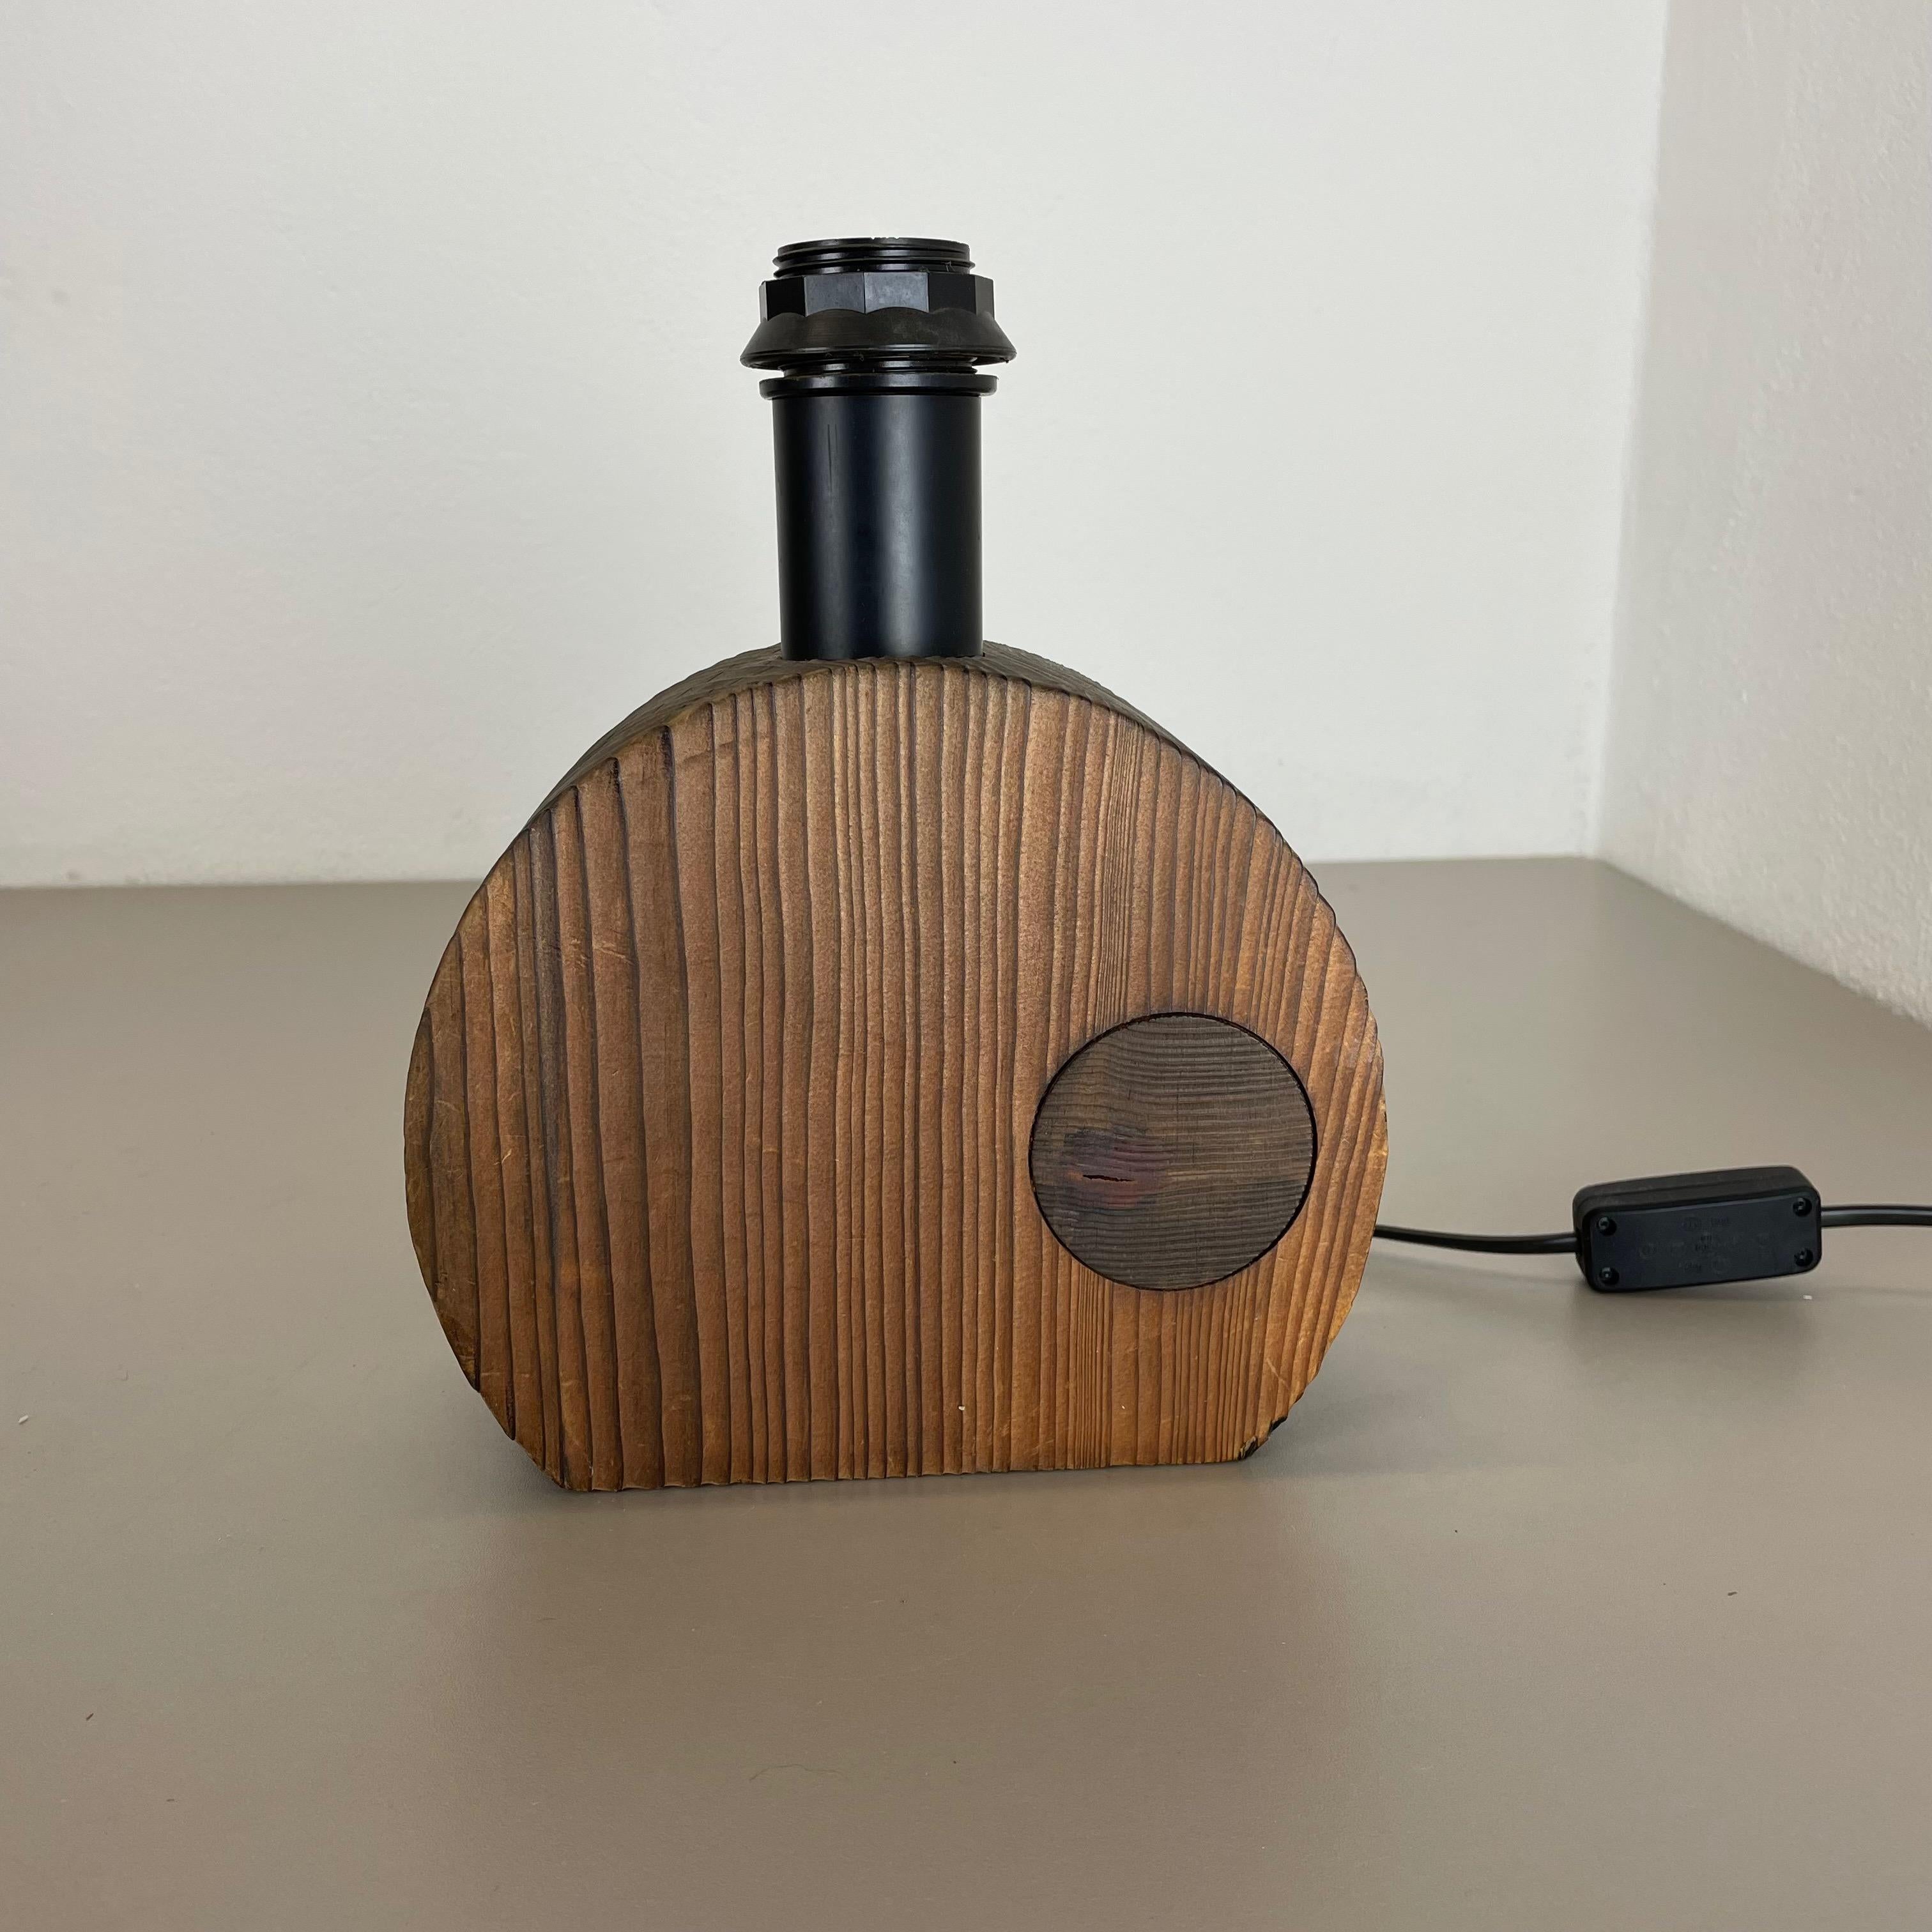 Organic Sculptural Wooden Table Light Made Temde Lights, Germany, 1970s In Good Condition For Sale In Kirchlengern, DE